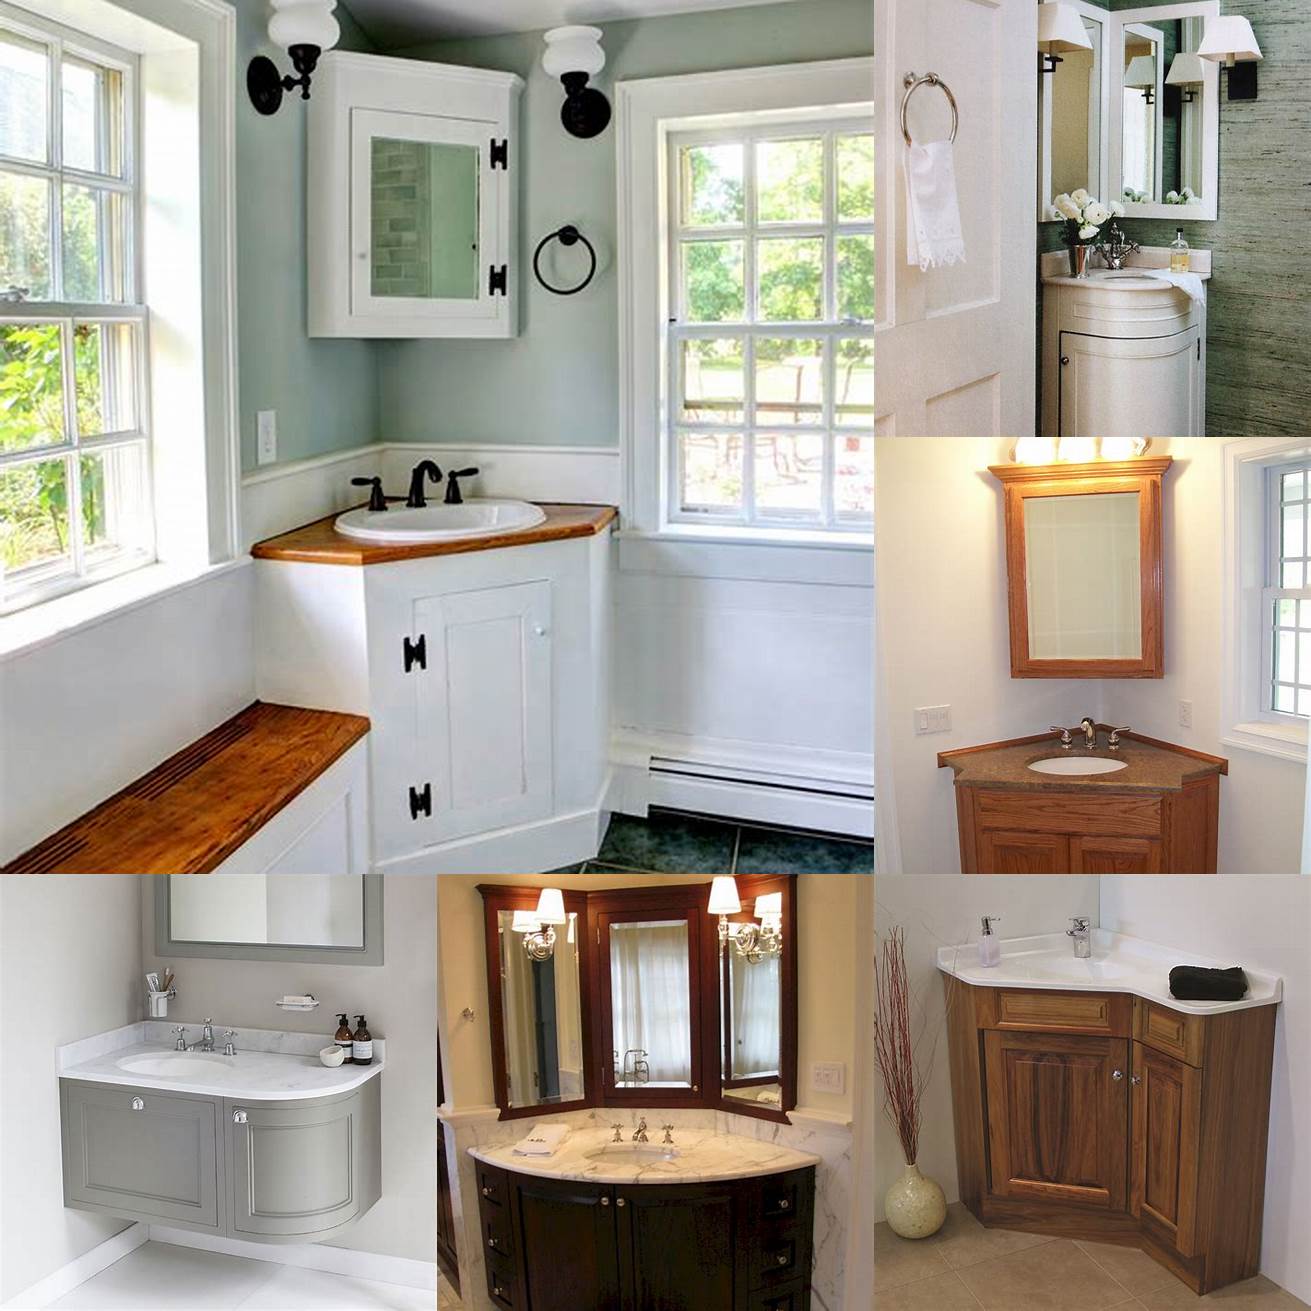 Corner vanities are perfect for small bathrooms and awkward spaces They take up less space than other types of vanities and they can be installed in corners to maximize space They come in different styles and sizes and they can be made of different materials such as wood metal and glass However they provide less storage space than other types of vanities